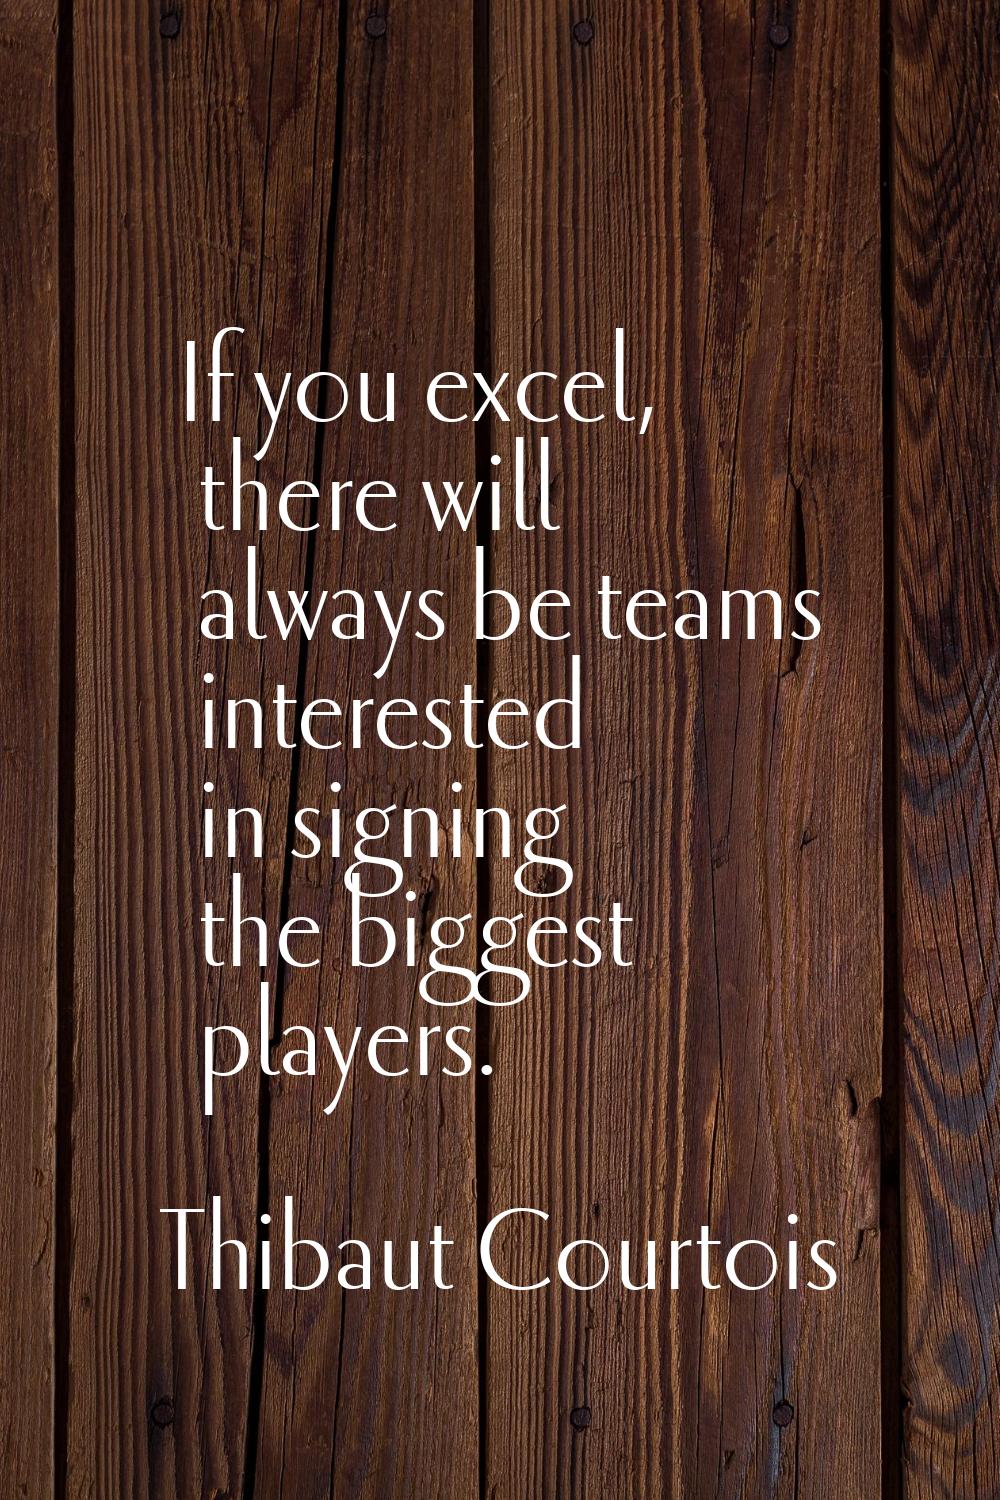 If you excel, there will always be teams interested in signing the biggest players.